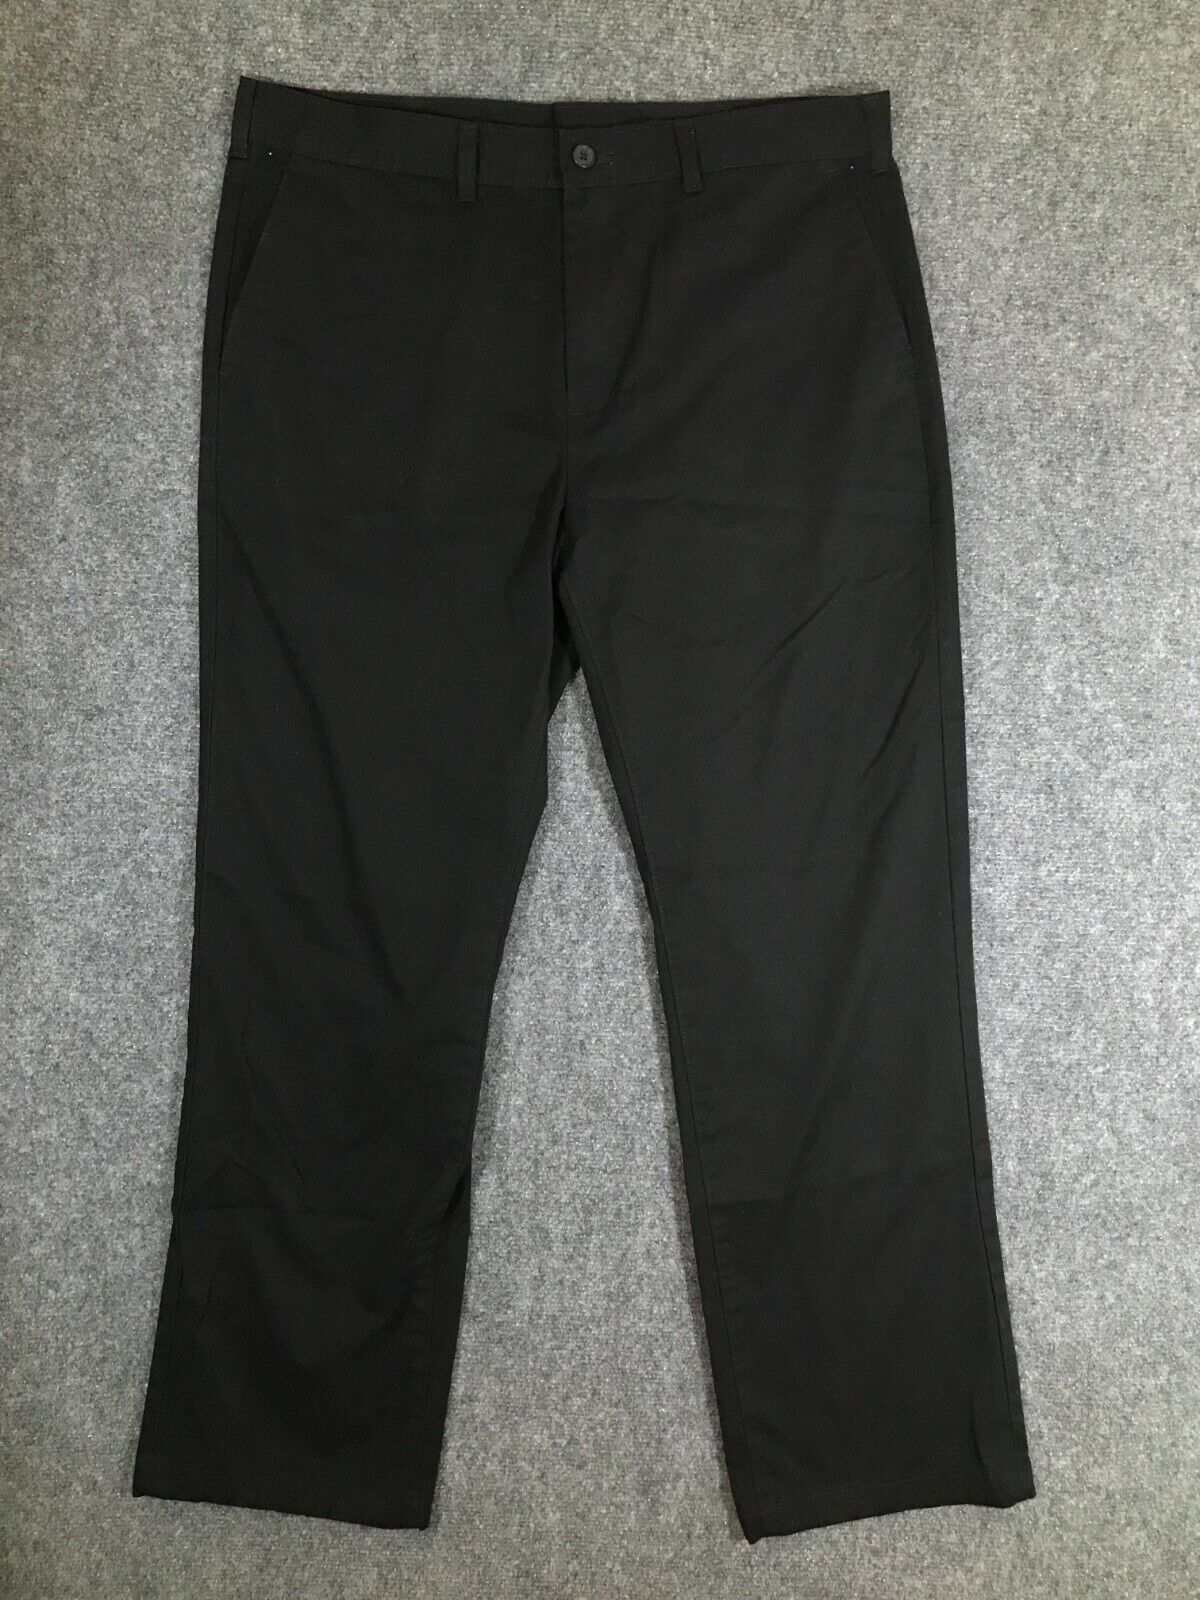 Primary image for George 36x32 Casual Mens Dress Pants Size 36 Black Soot Straight Leg Workwear